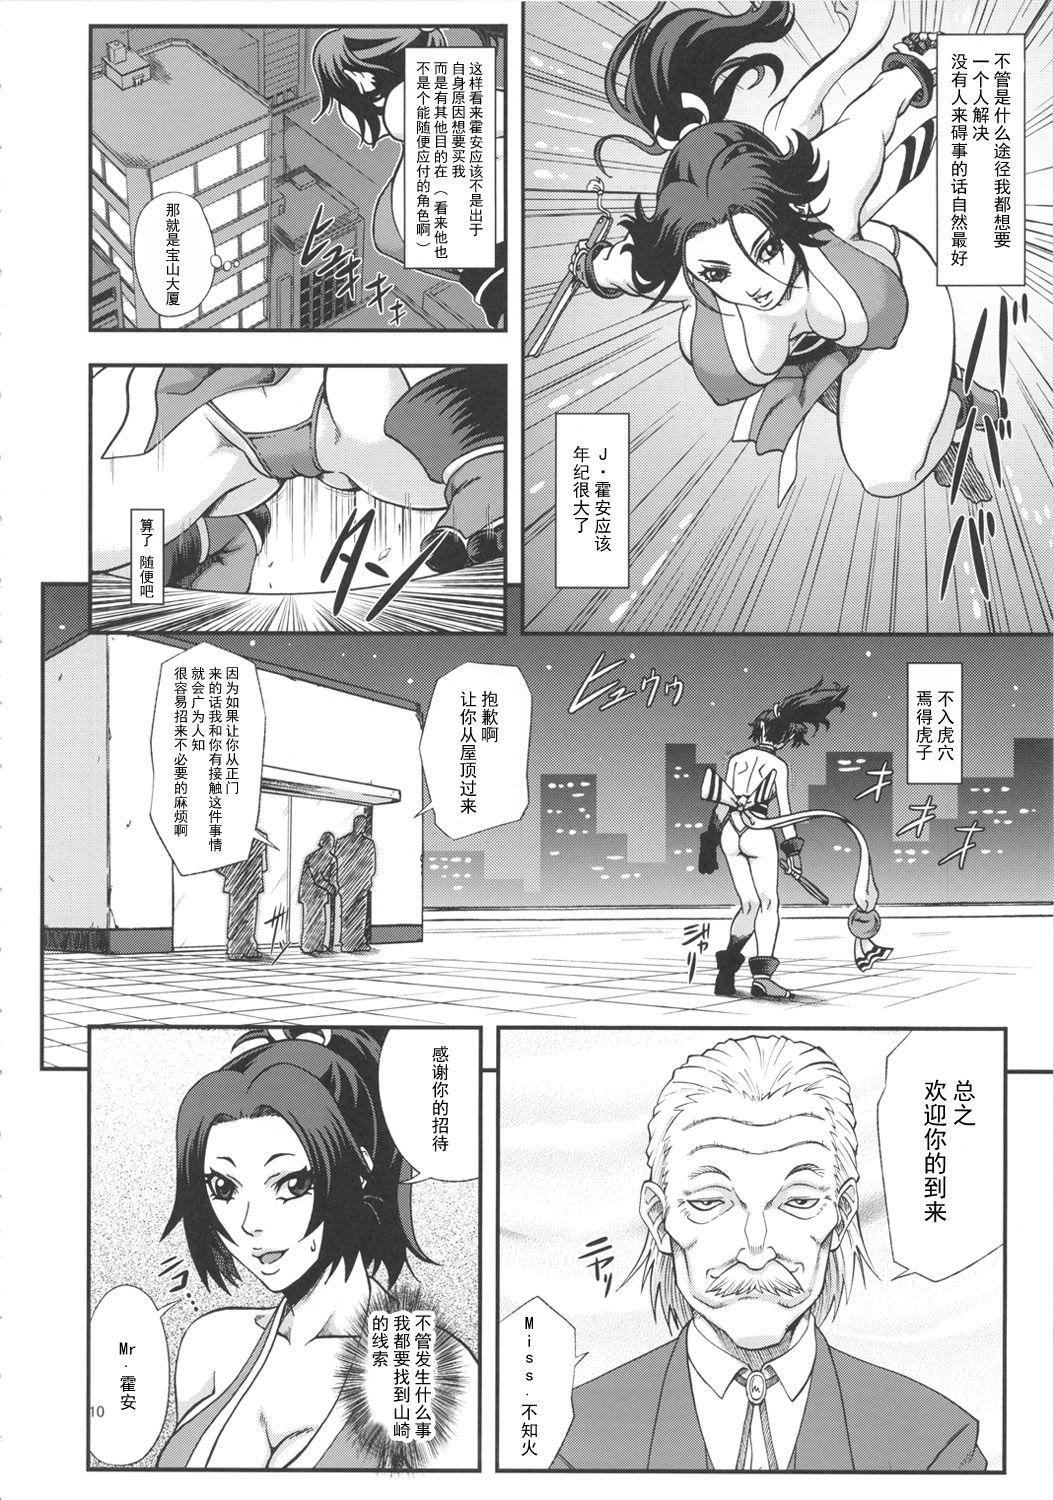 Assfucked [Tokkuriya (Tonbo)] Shiranui Muzan 3 (King of Fighters) [Chinese]【不可视汉化】 - King of fighters Trap - Page 10